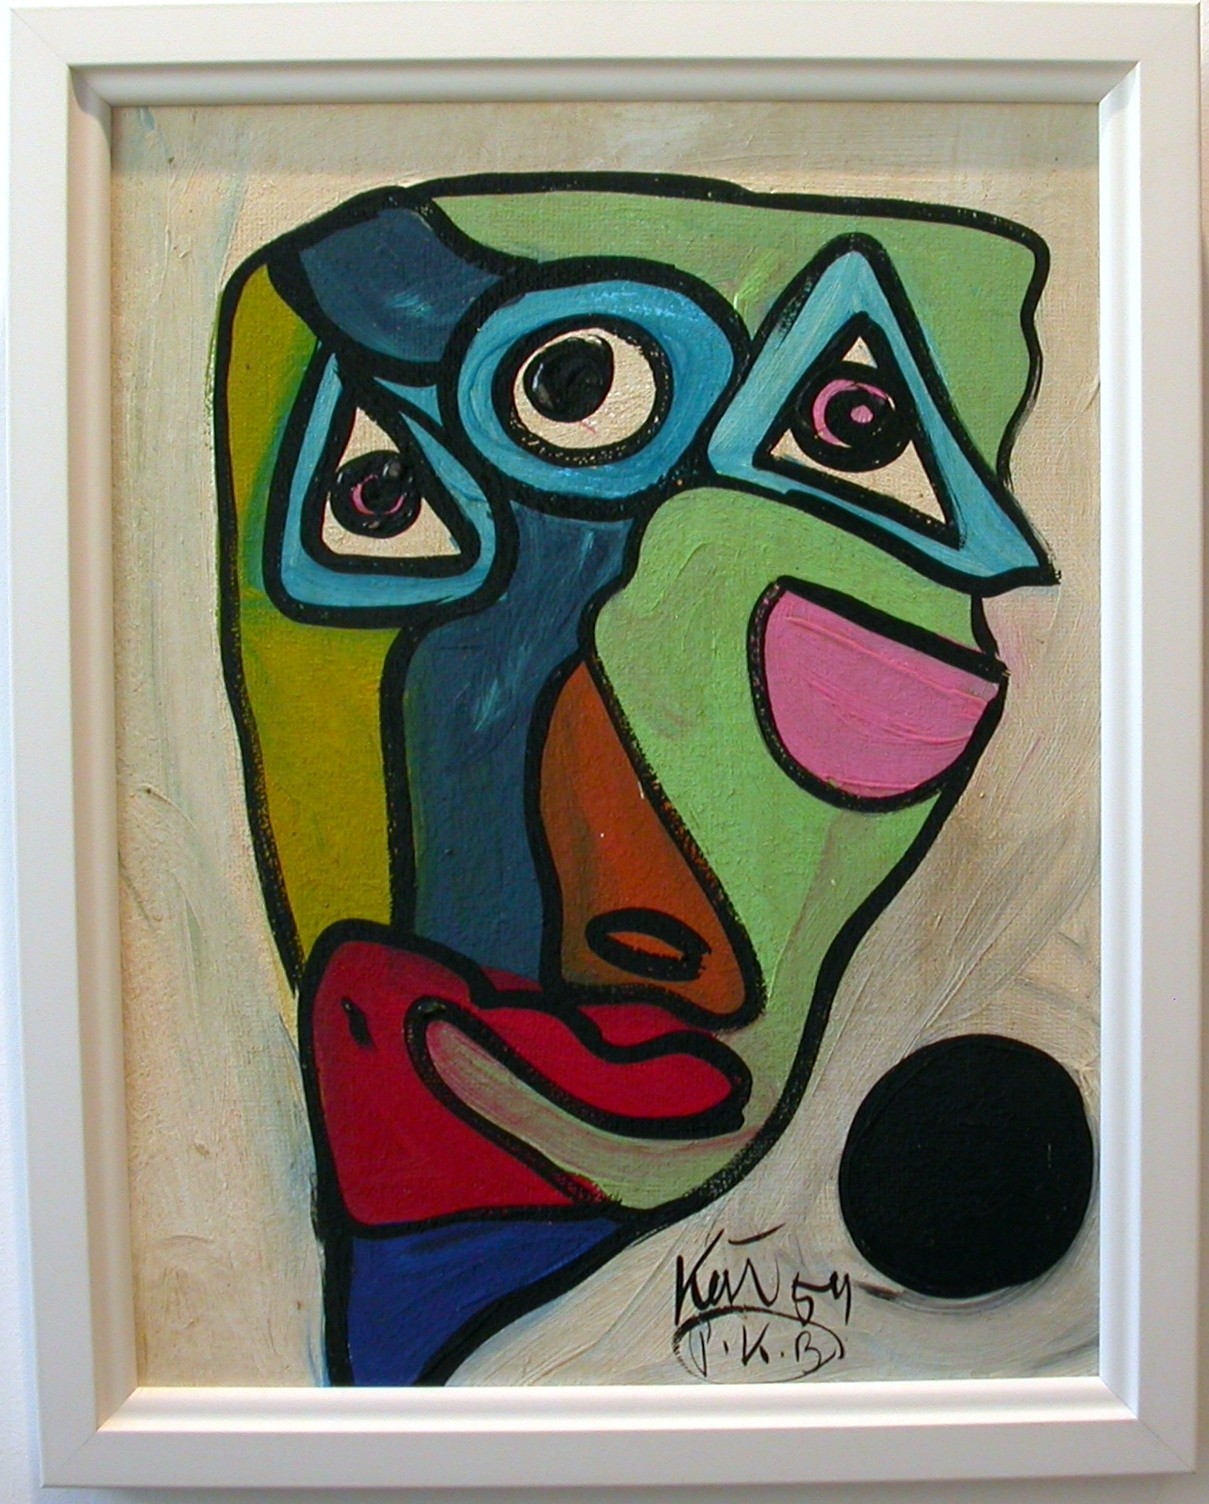 Keil "Hommage an Pablo Picasso"